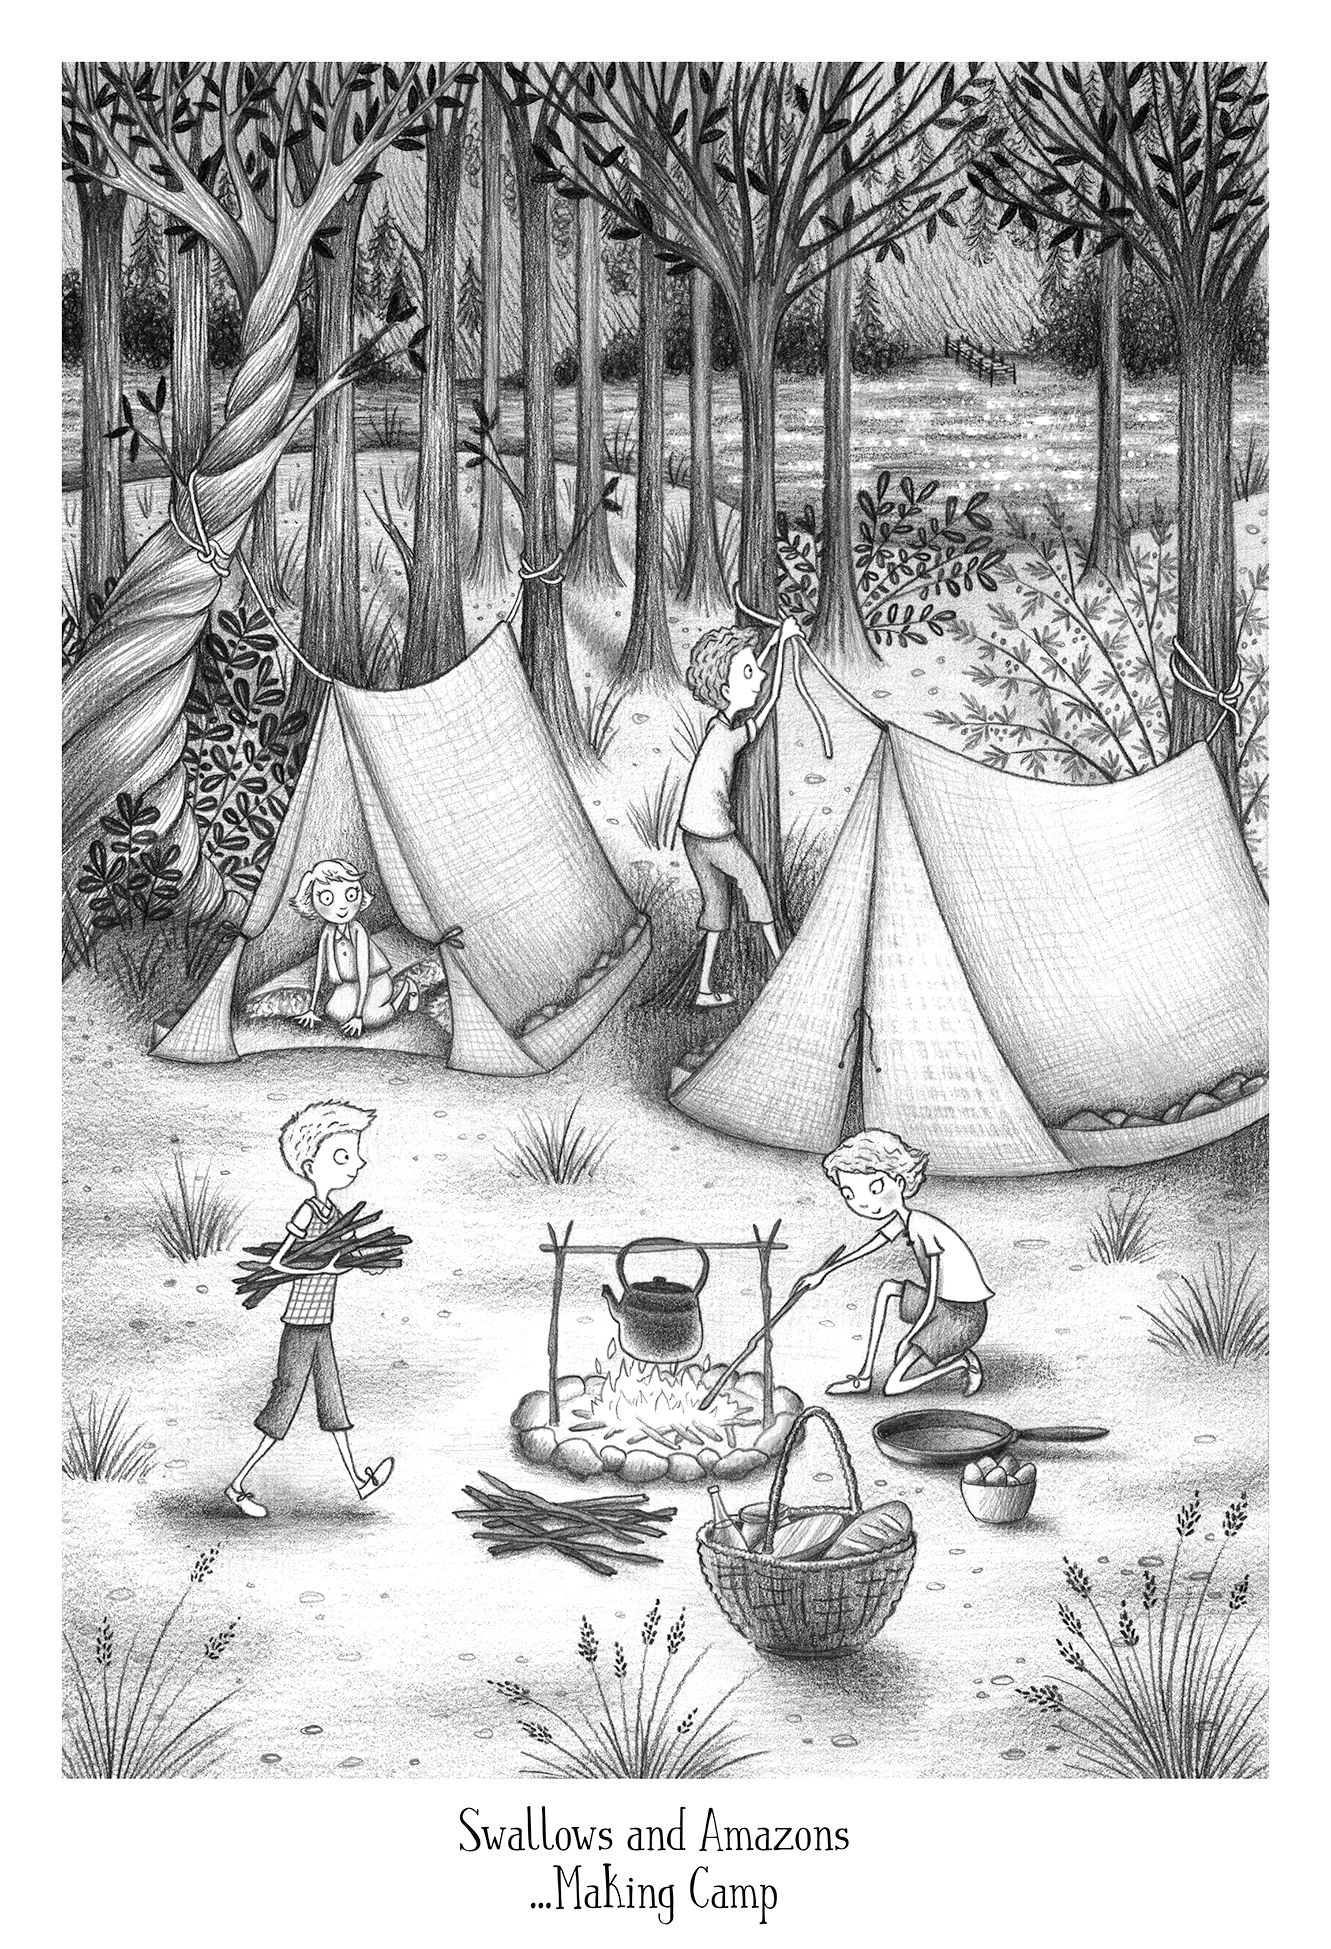 Swallows and Amazons Illustration